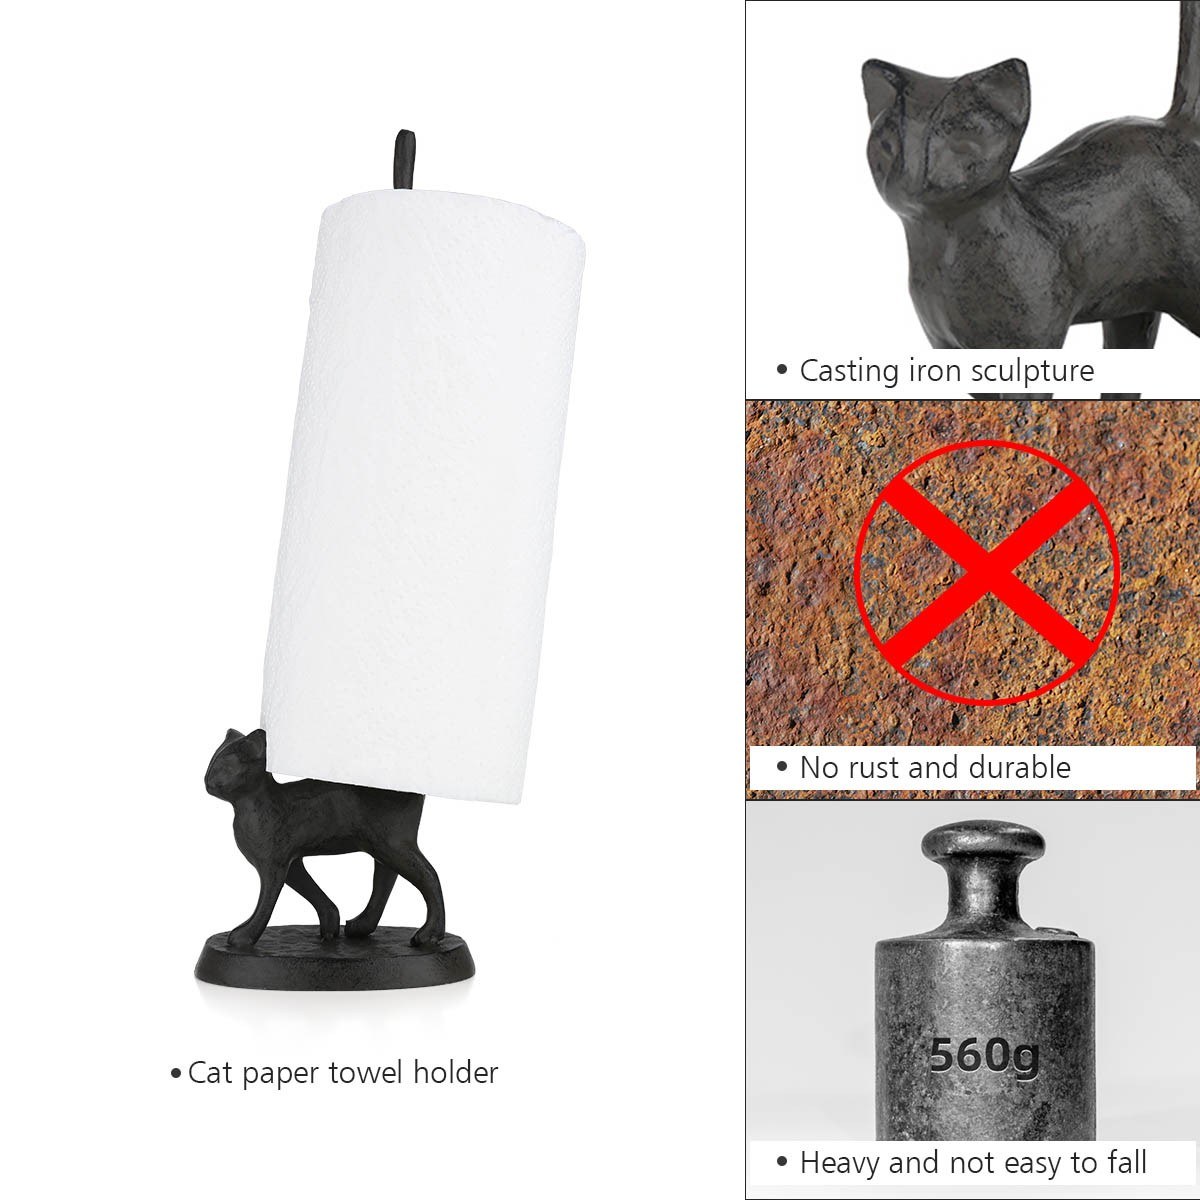 Cat paper towel holder it funny in your dinner table, kitchen countertop!